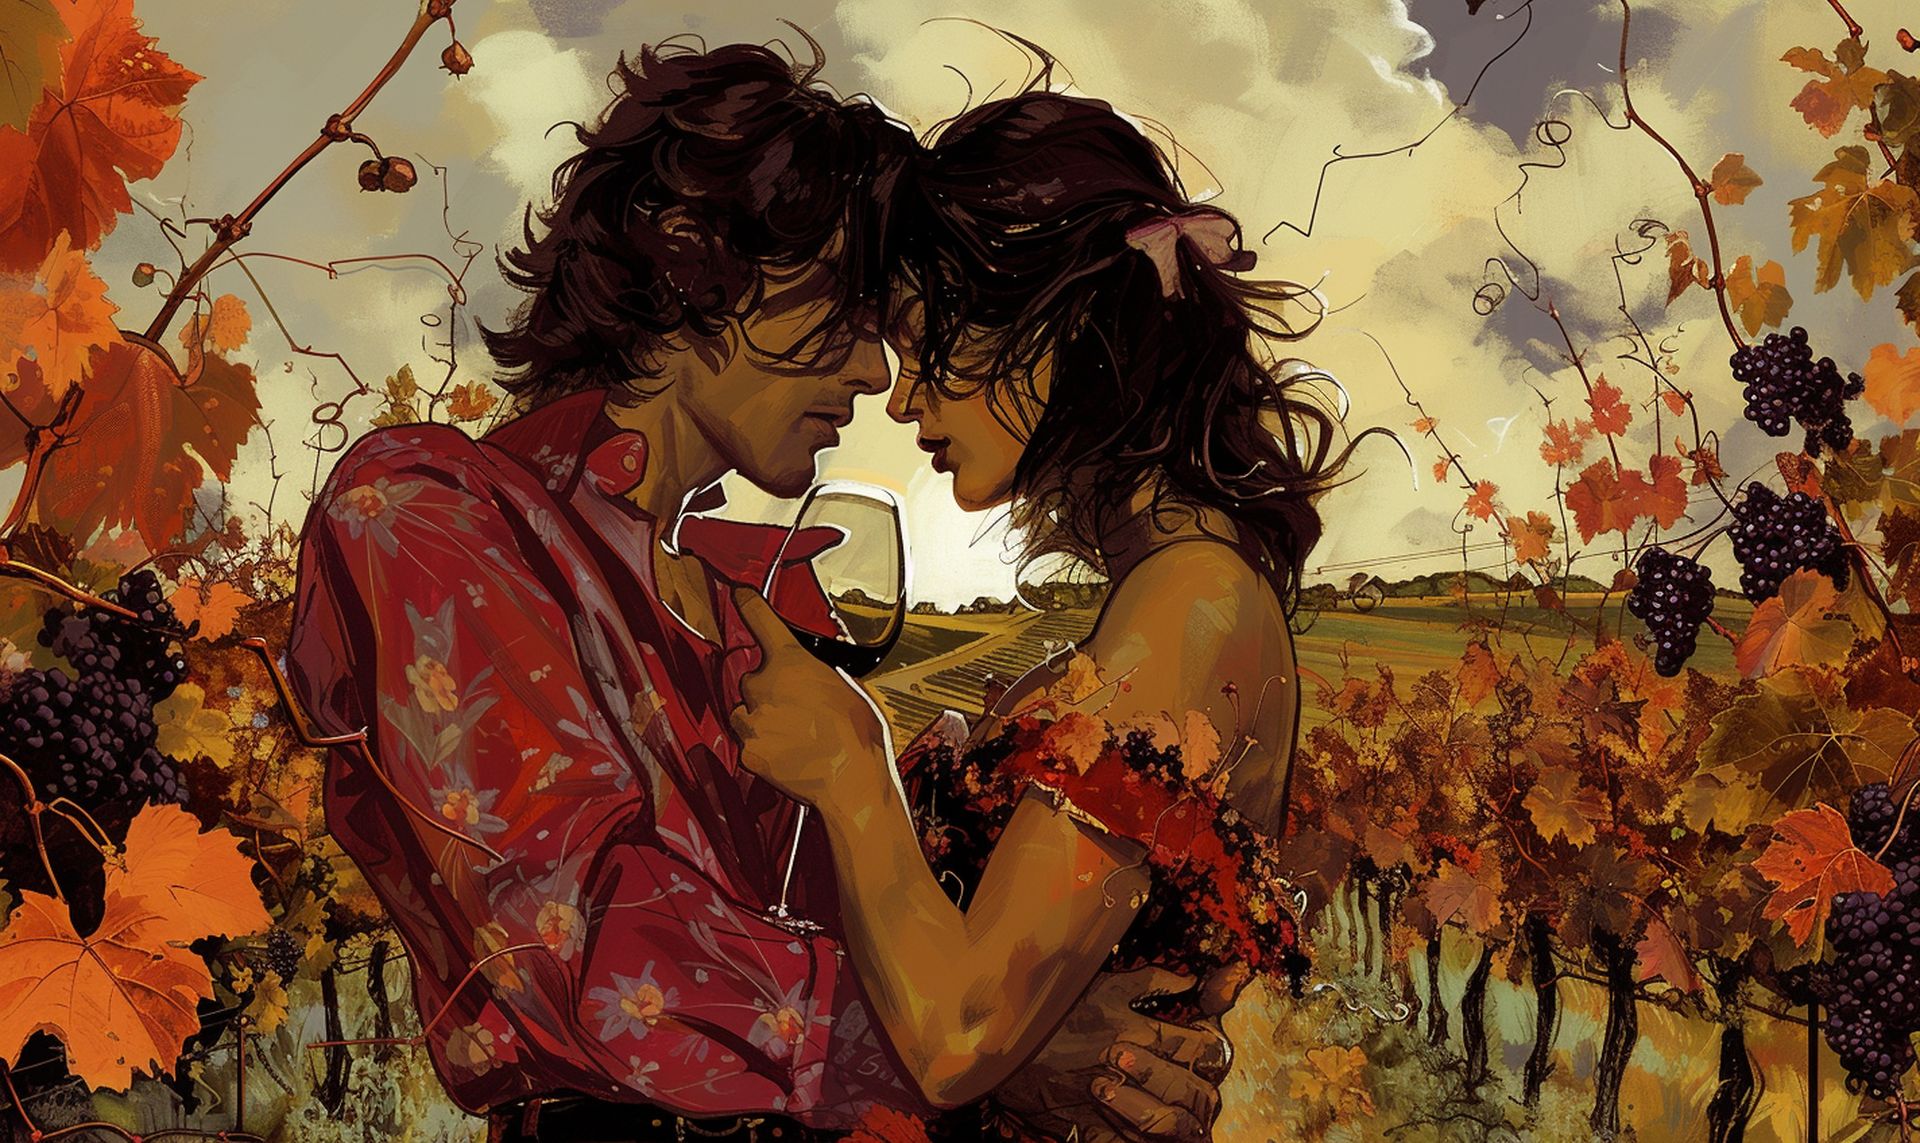 A vivid portrayal of a 1960s couple sharing a tender moment in a vineyard, with a backdrop of a music festival. The image embodies the themes of 'Love Is Wine,'. Image credit: Umut Taydaş